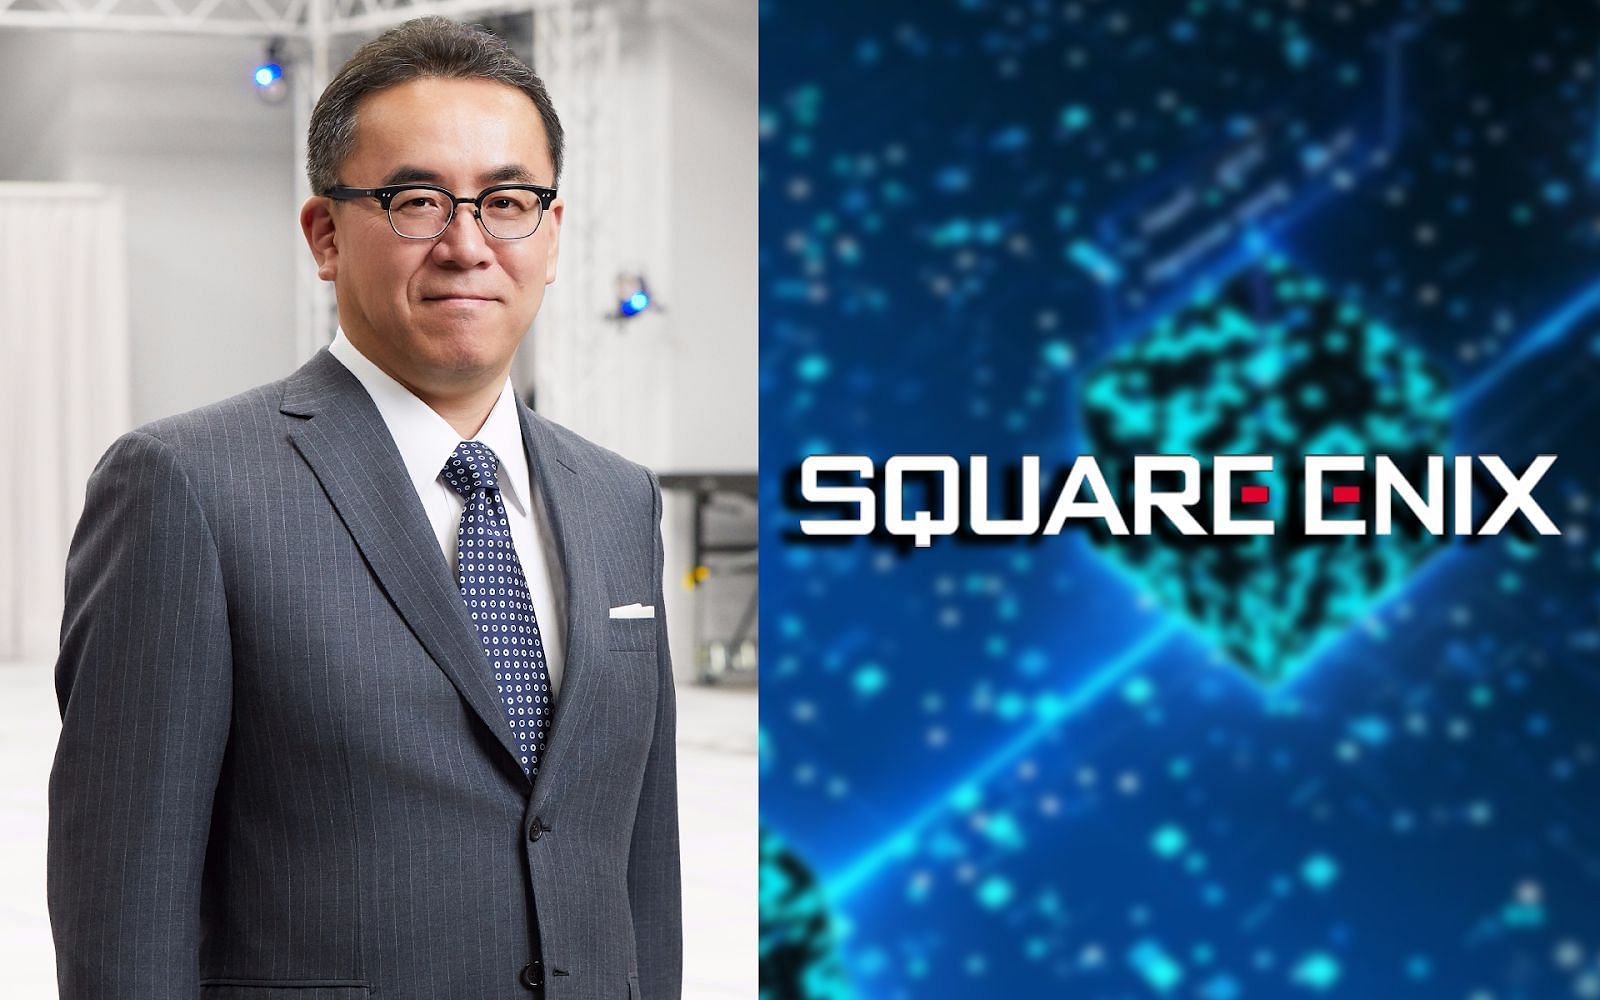 Square Enix President and CEO Yosuke Matsuda talks about Blockchain and NFTs in video games (Image by Sportskeeda)